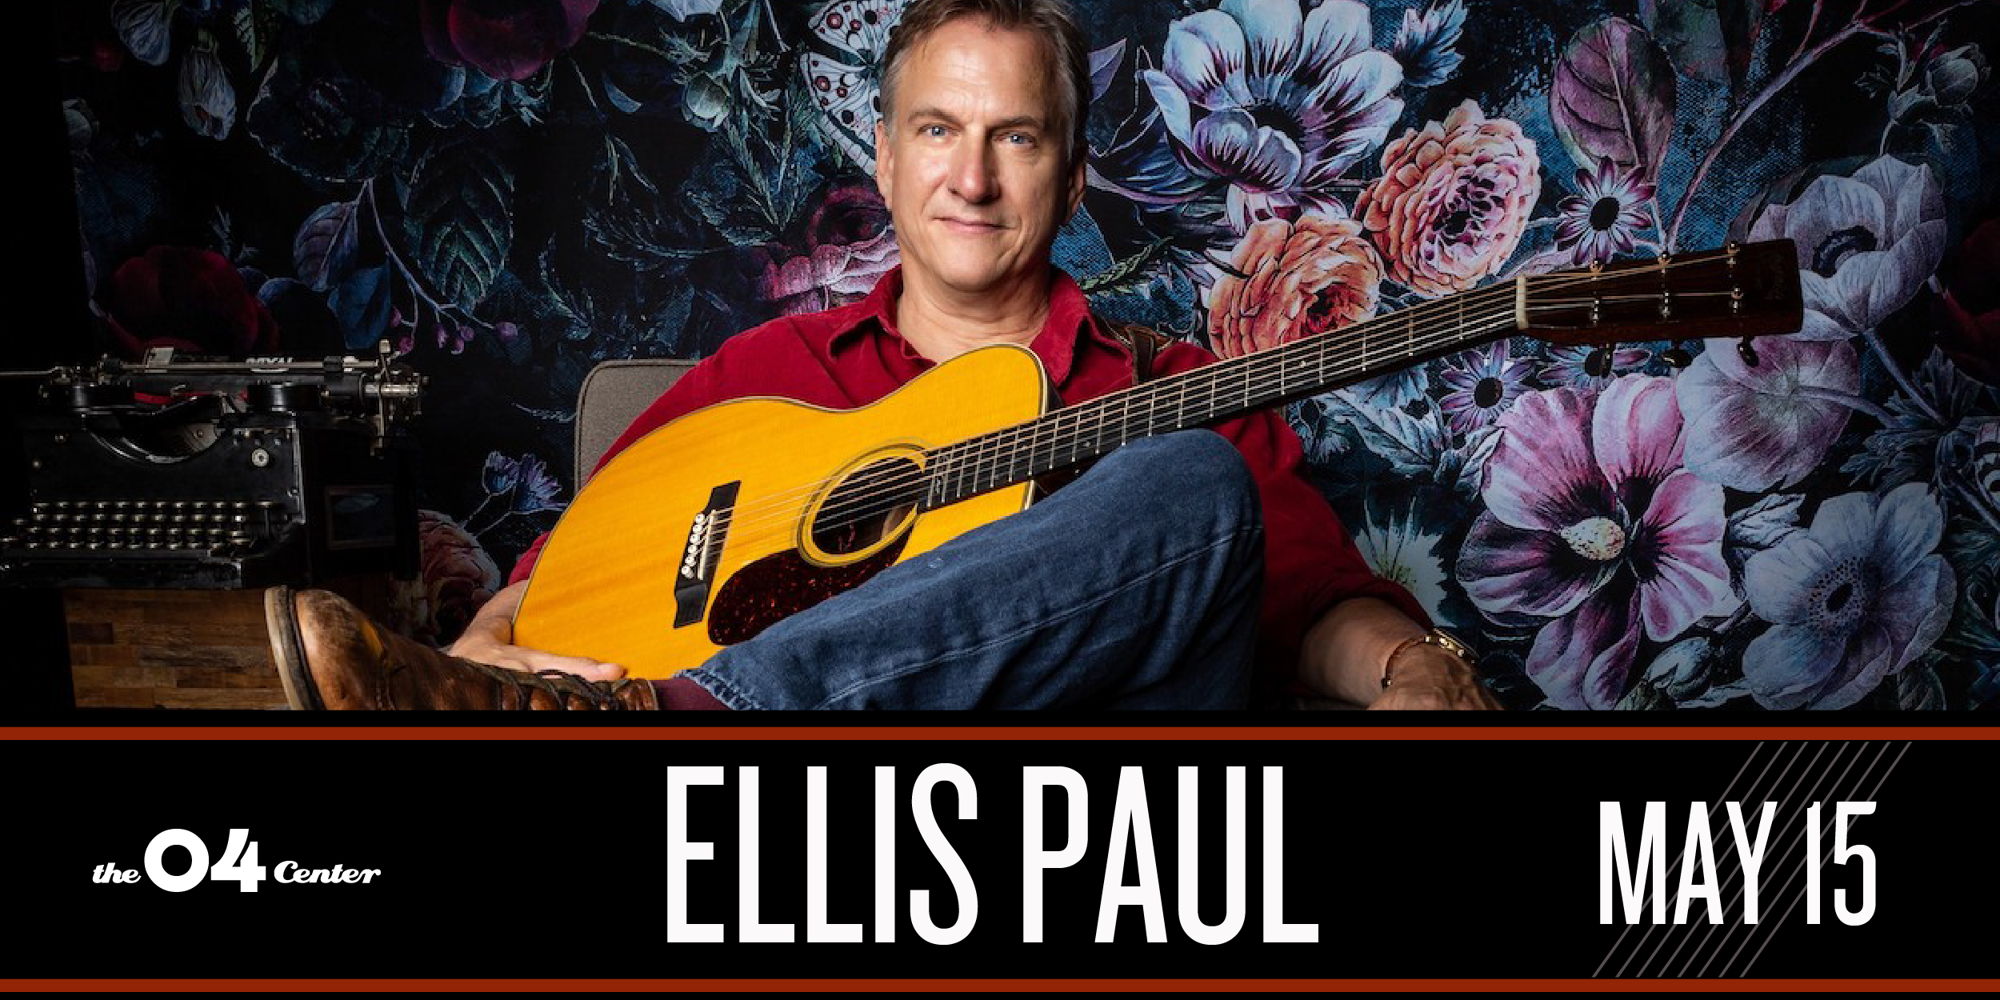 An evening with Ellis Paul featuring Don Conoscenti promotional image